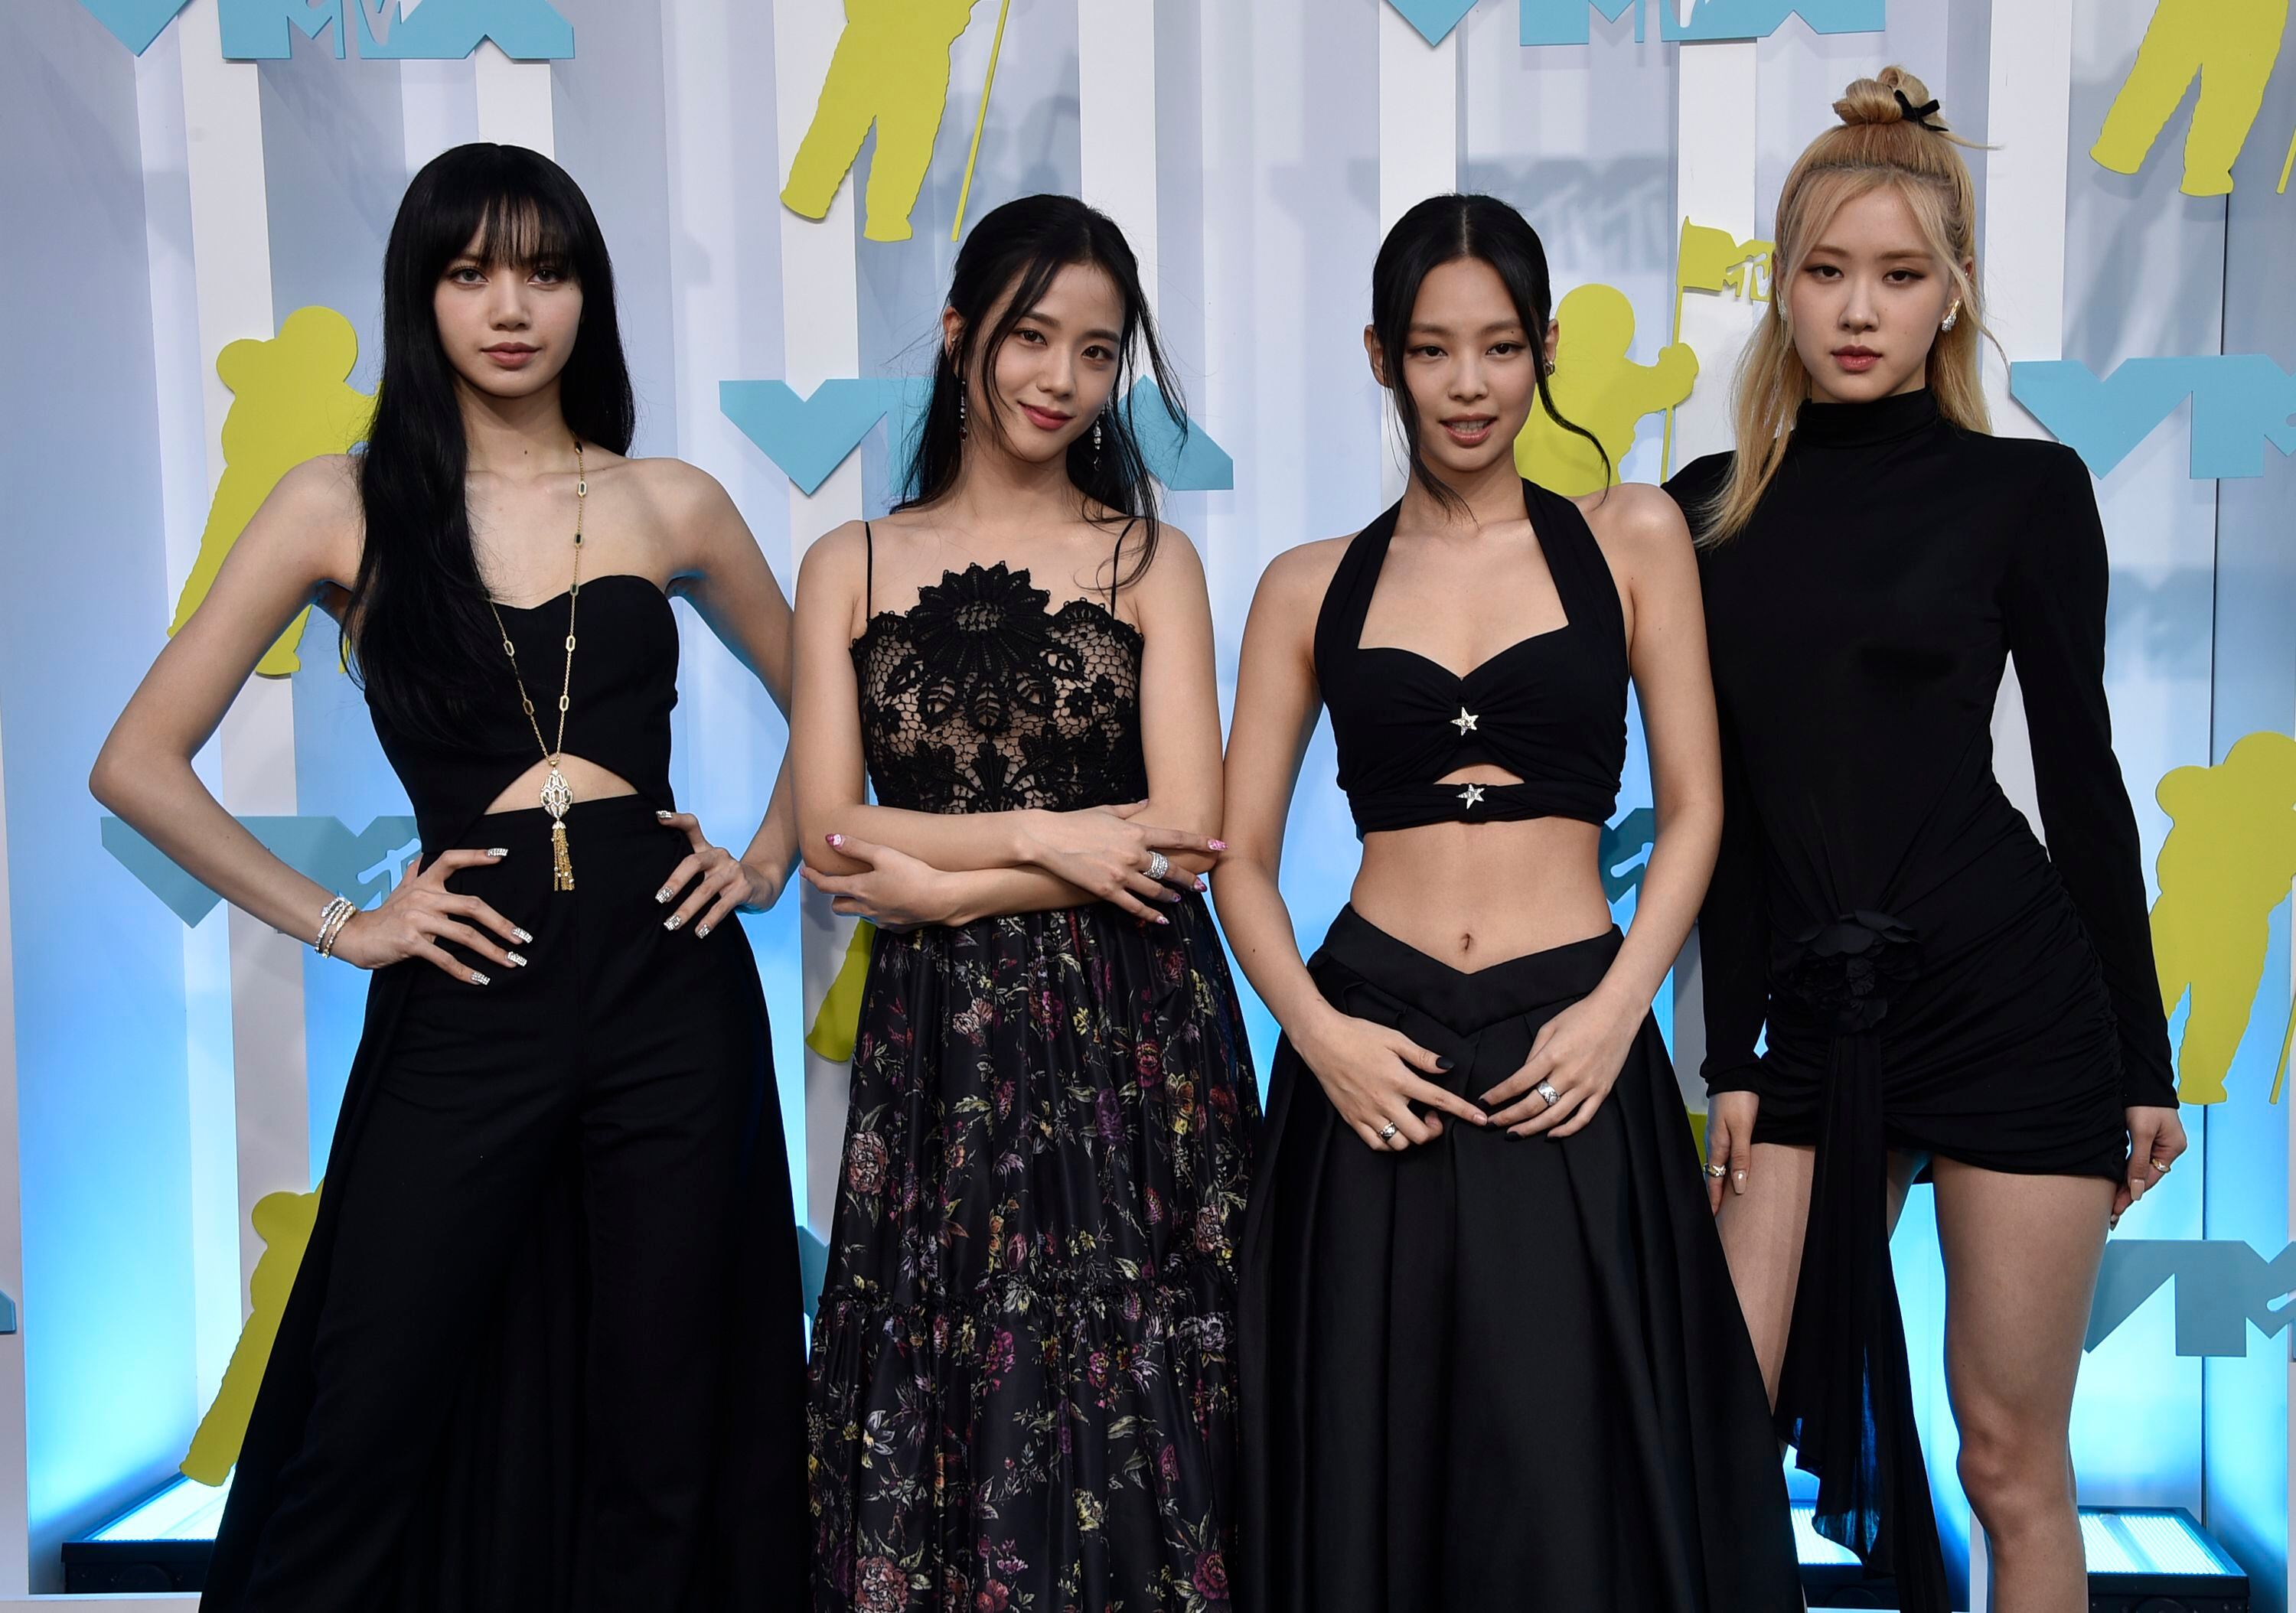 Blackpink, from left, Lisa, Jisoo, Jennie, and Rose arrive at the MTV Video Music Awards at the Prudential Center on Sunday, Aug. 28, 2022, in Newark, N.J. (Photo by Evan Agostini/Invision/AP)